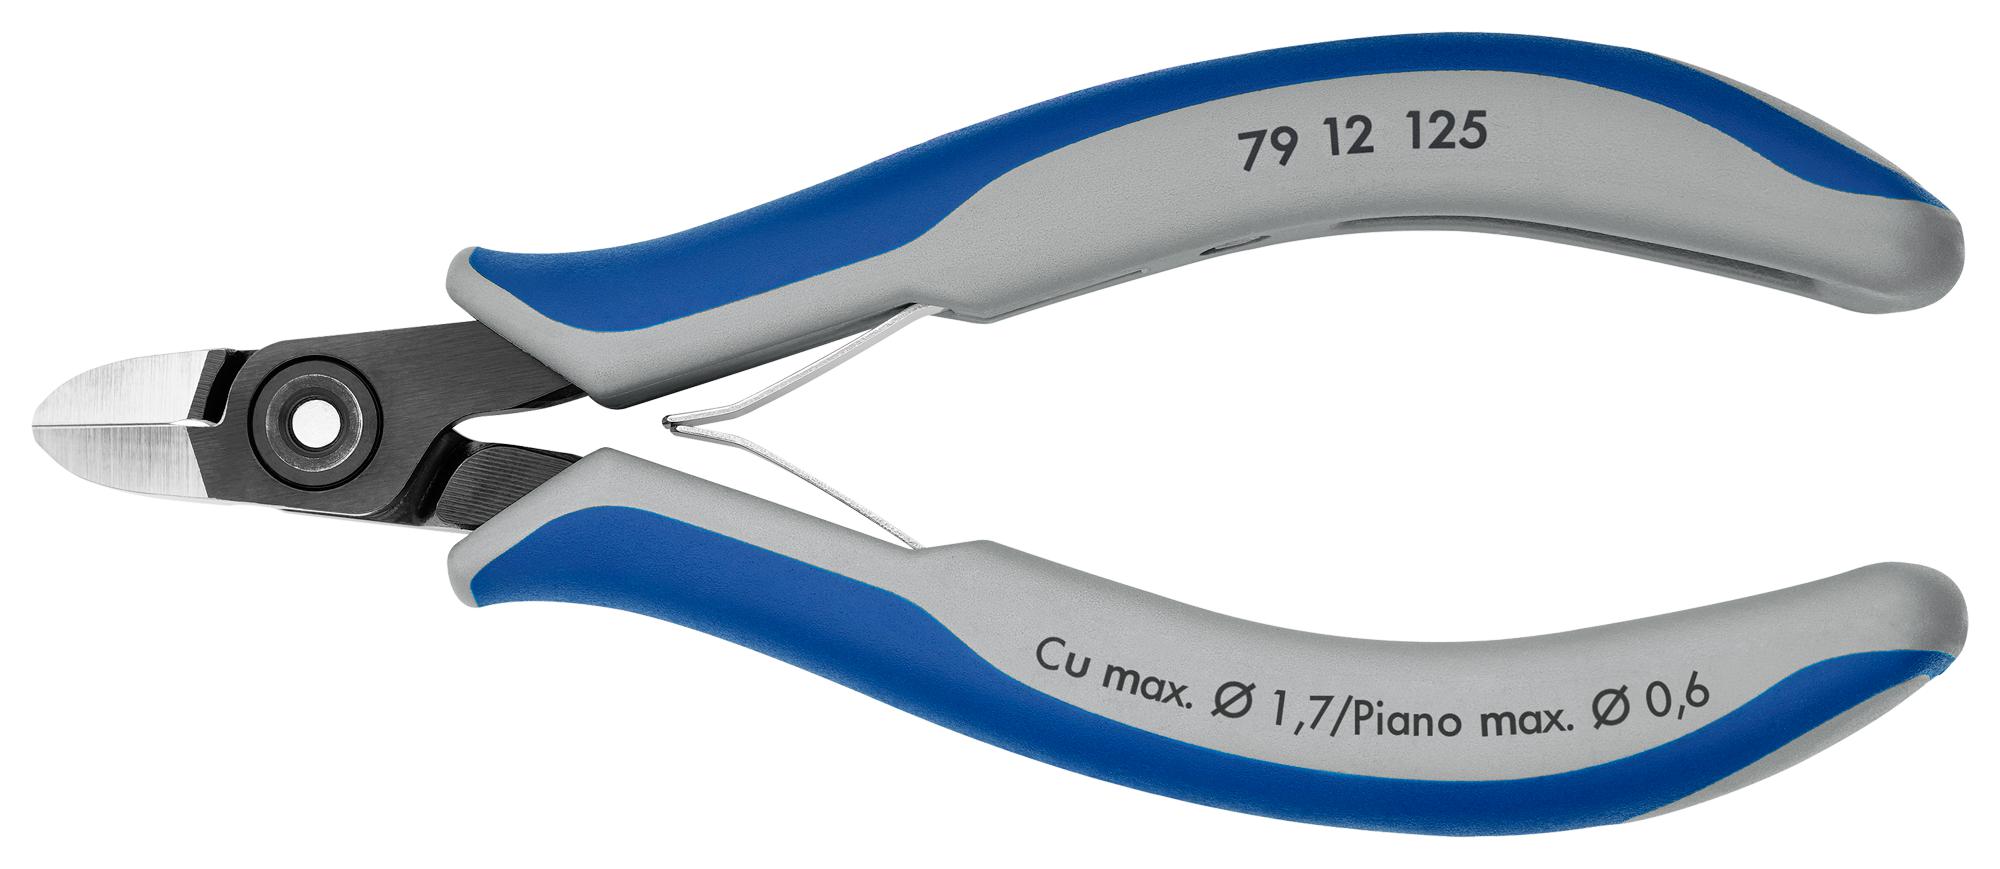 79 12 125 SIDE CUTTERS, ELECTRONIC PRECISION KNIPEX